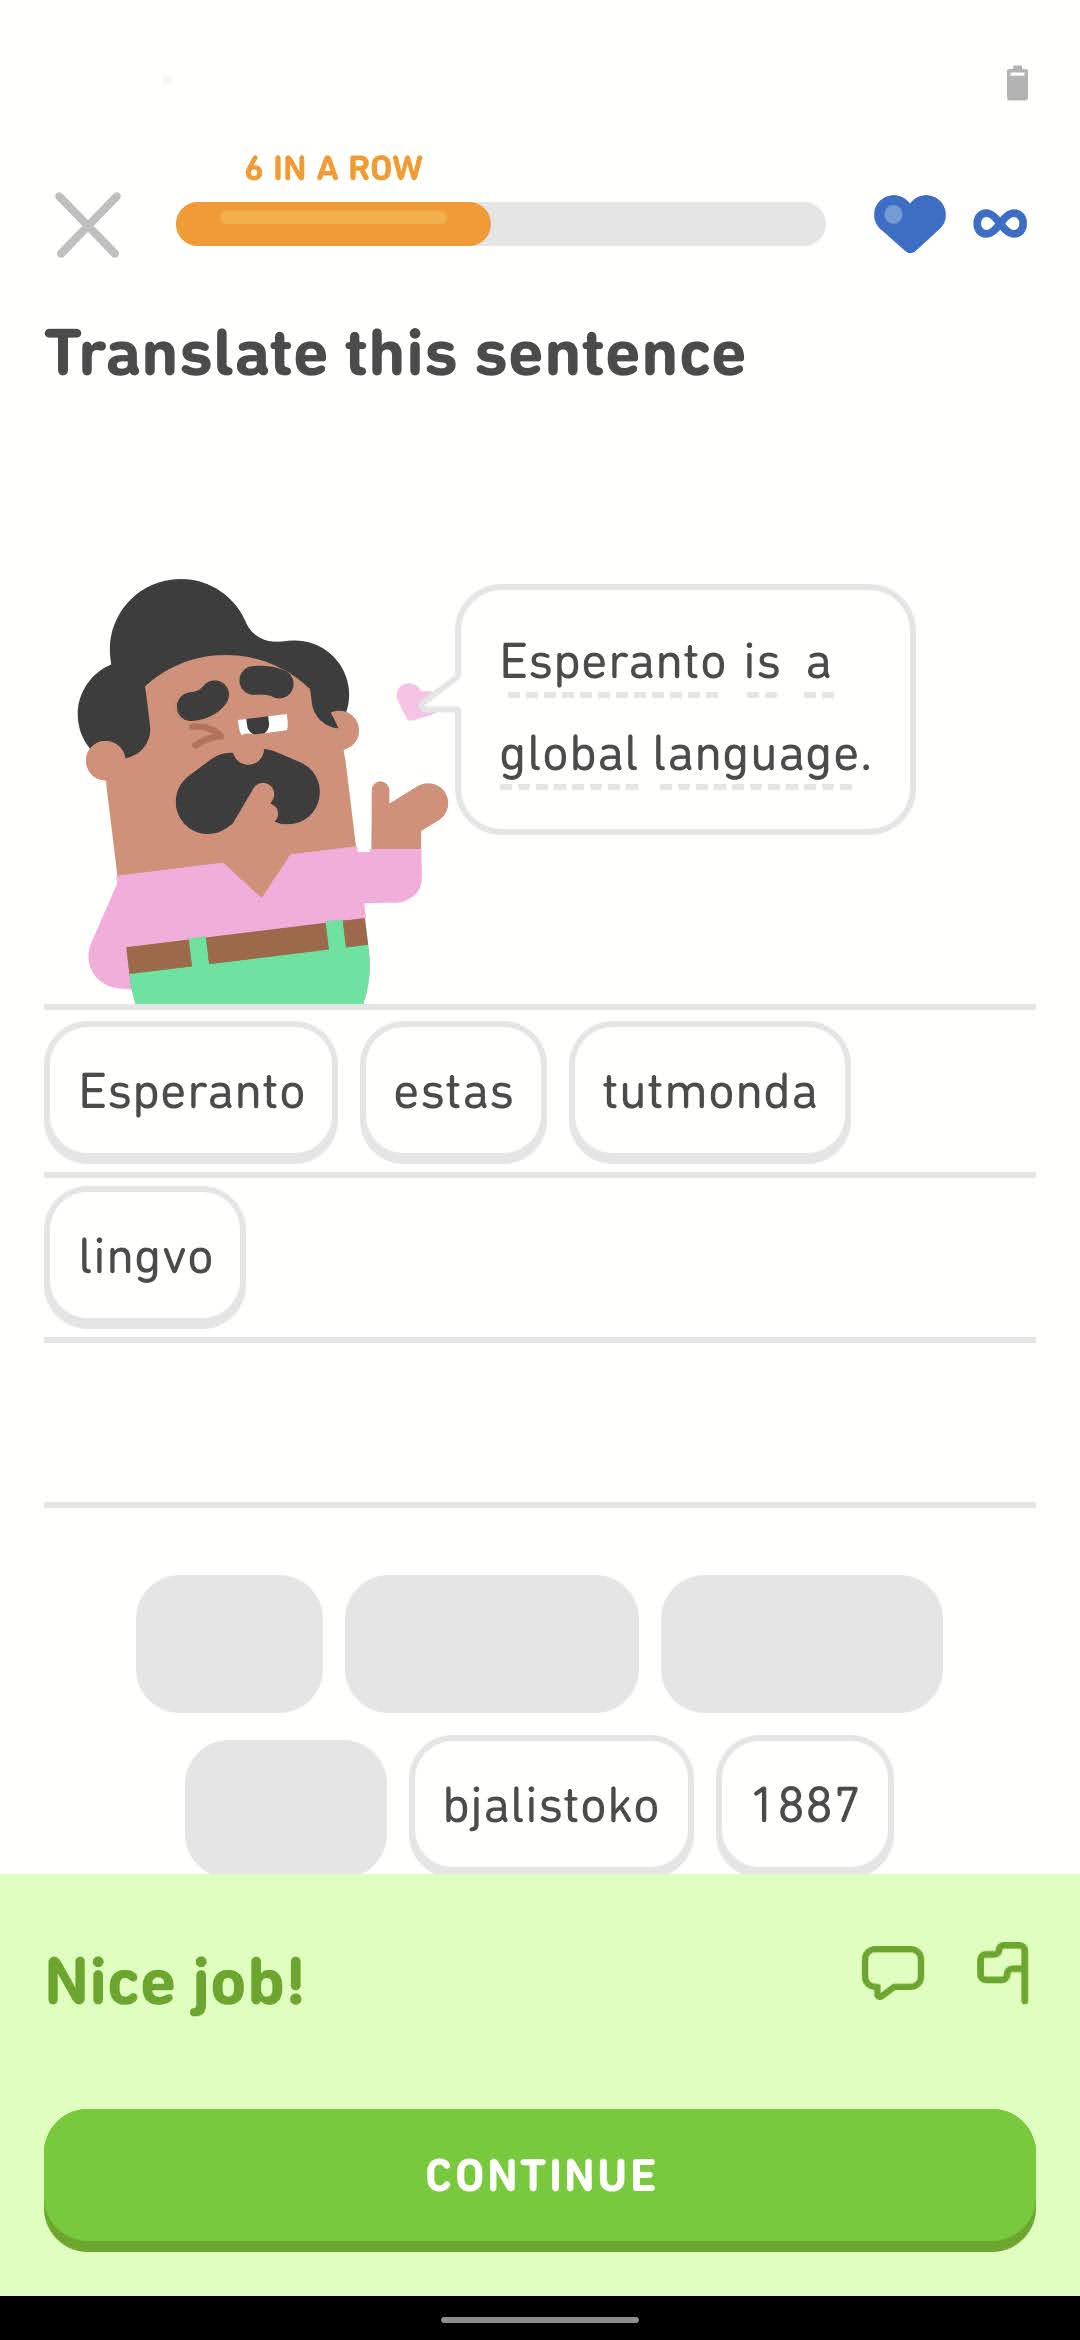 Screenshot of an exercise from Duolingo's Esperanto course. The Duolingo character Oscar says in English "Esperanto is a global language." and the Esperanto translation is spelled out below in word tiles.